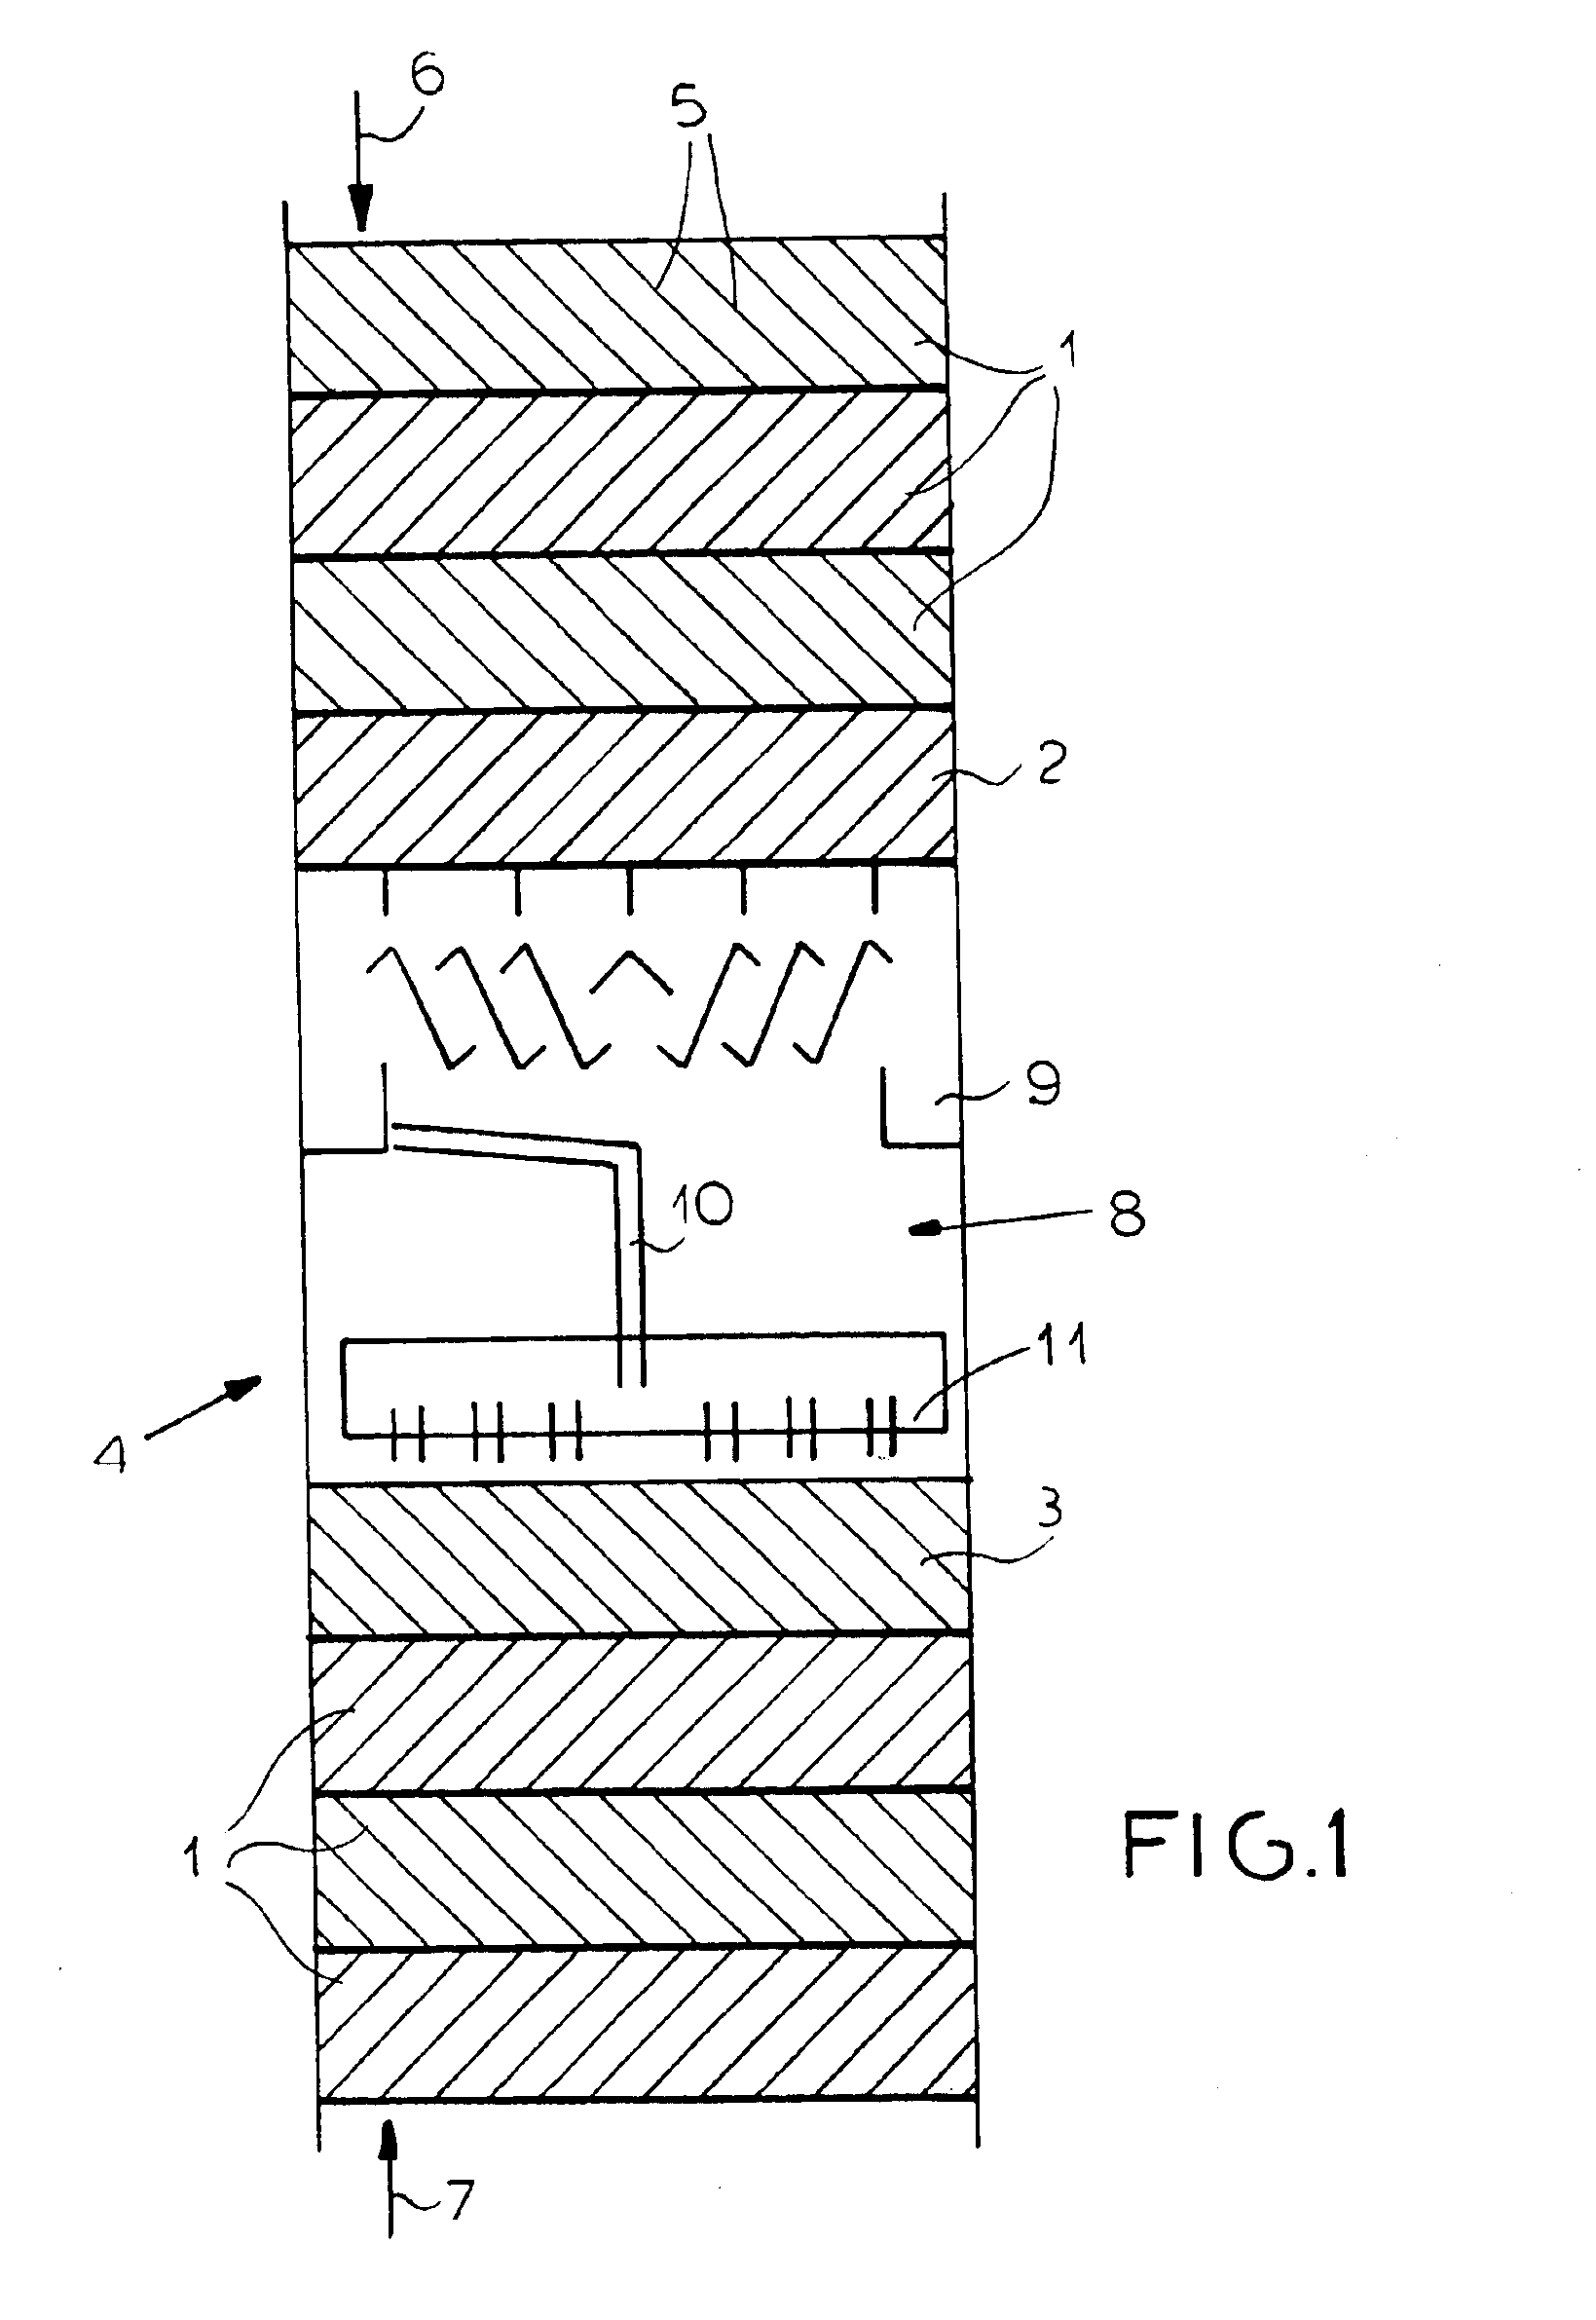 Heat exchange and mass transfer packing and packed column utilizing same